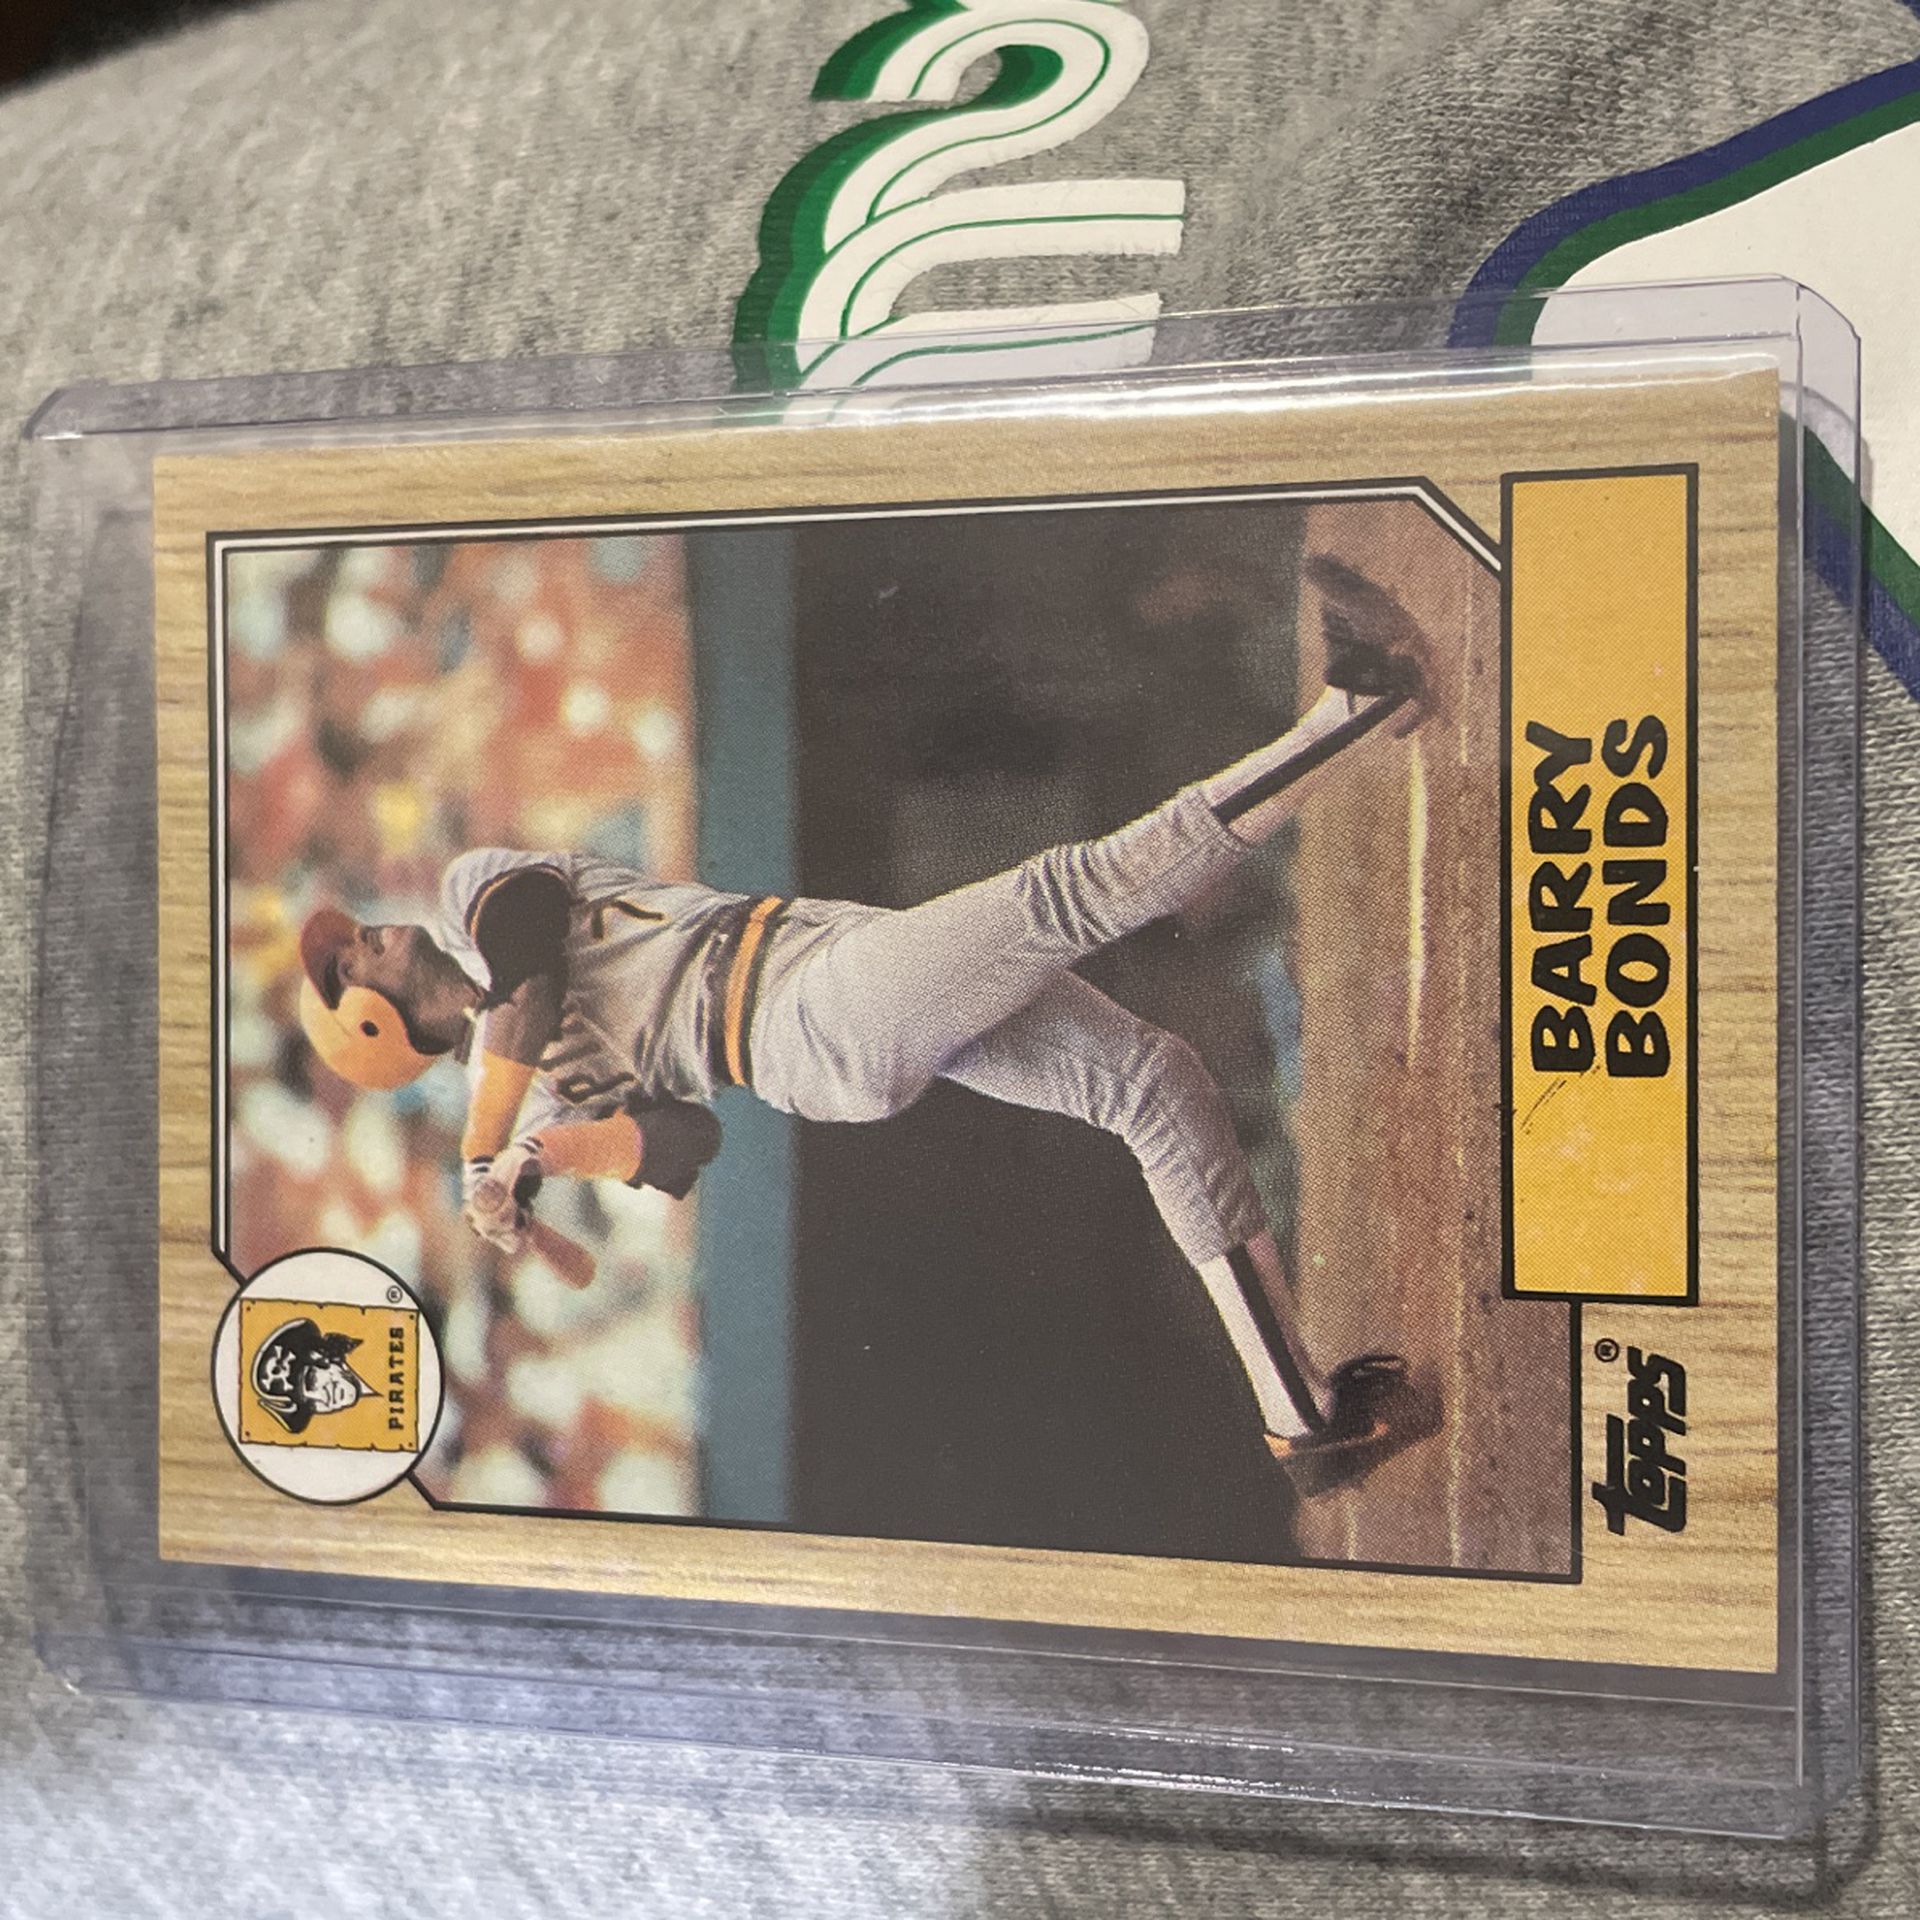 Barry Bonds Rookie Card Topps for Sale in Dallas, TX - OfferUp